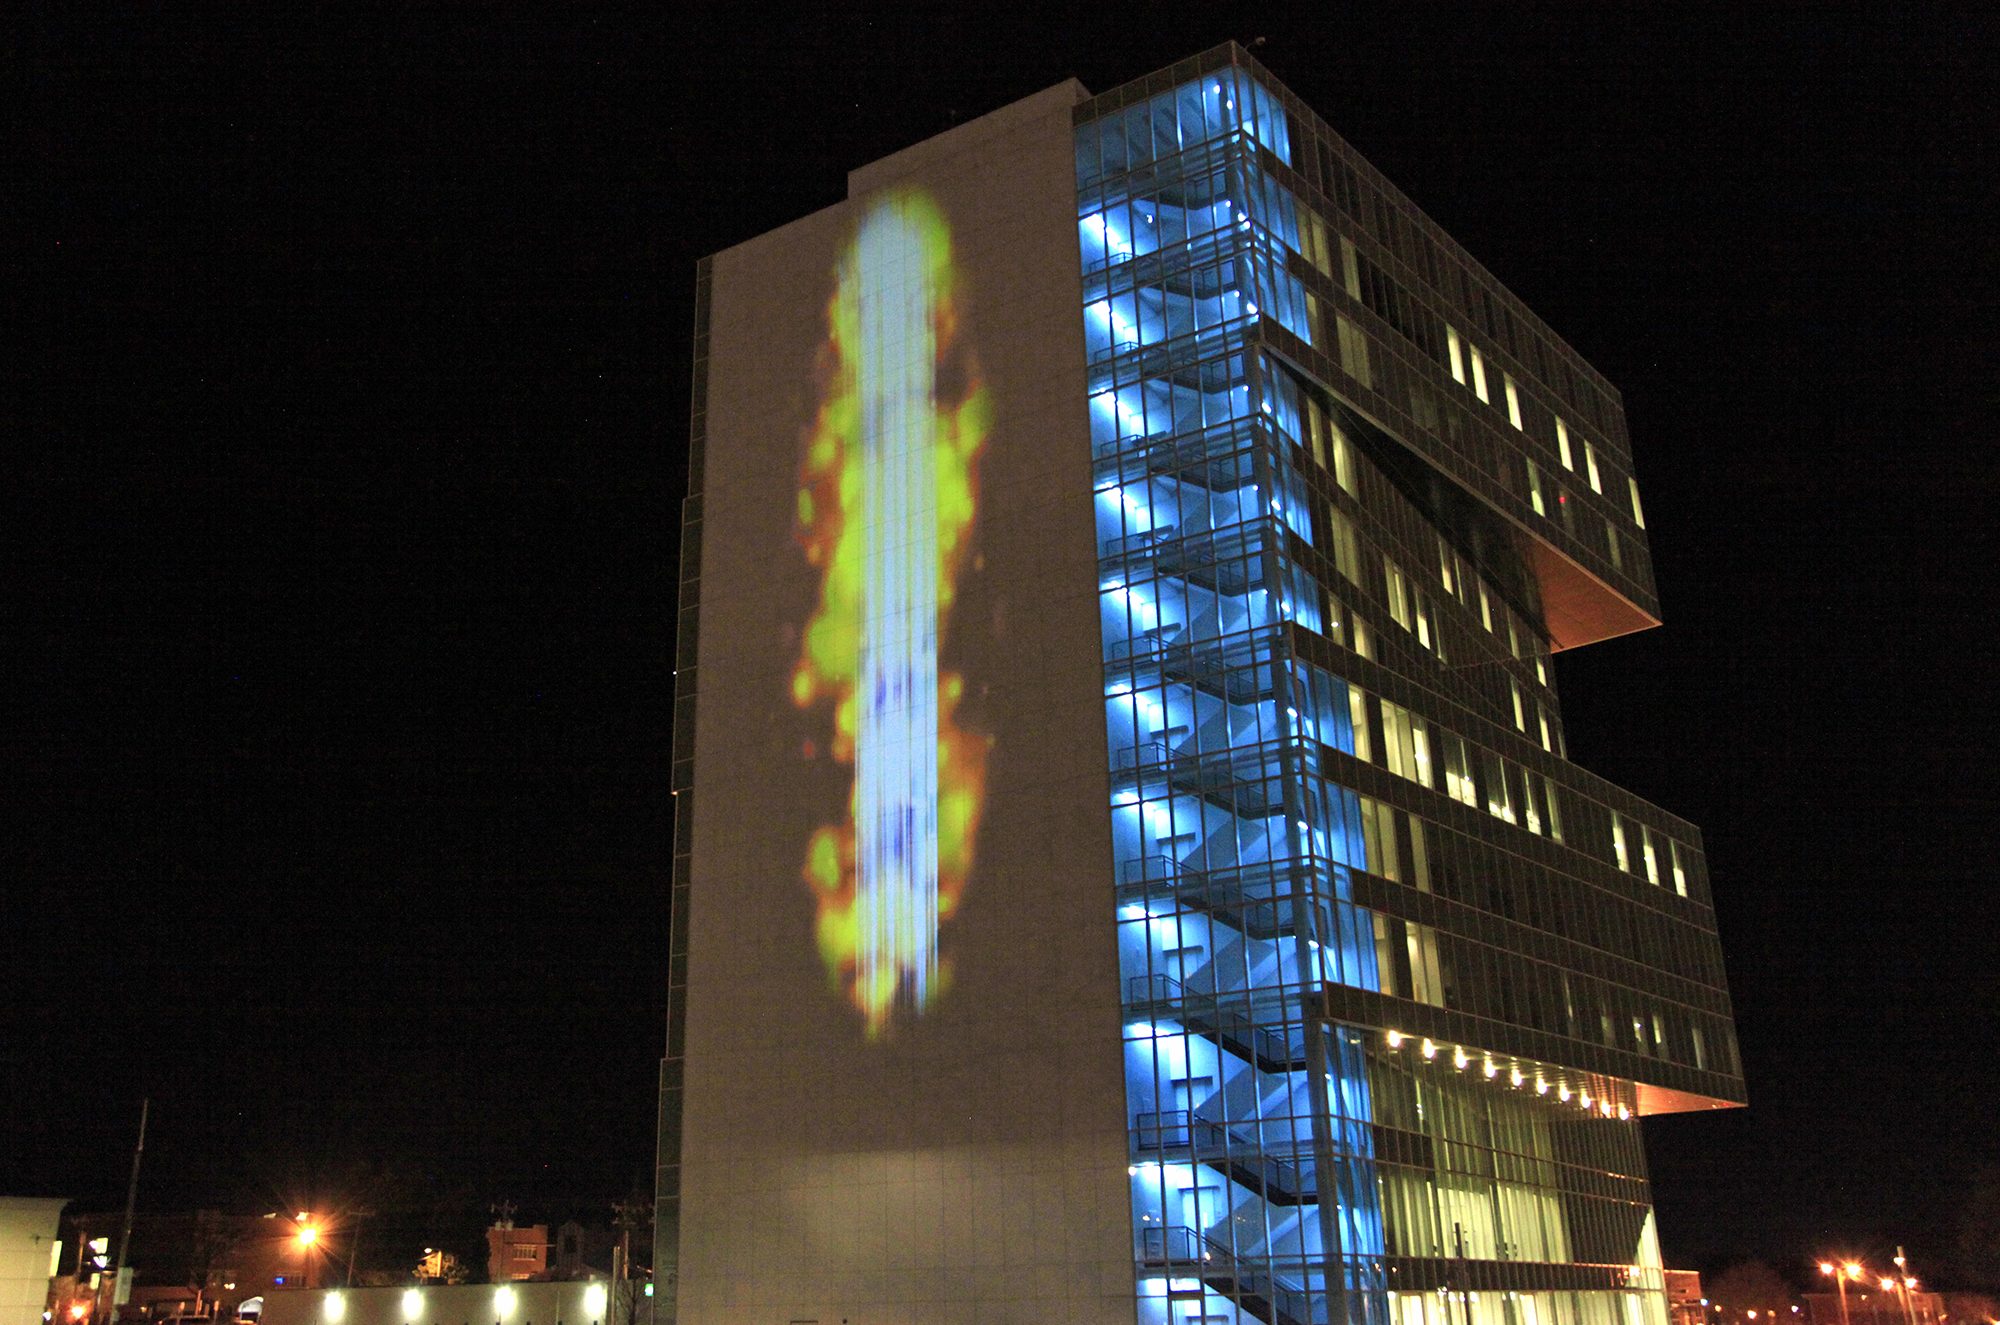 Andrea Polli, Particle Falls | City Center, UNC Charlotte 2016 | Blue light, occasionally interrupted by fire-colored spots representing air pollution, cascades down the side of a building.